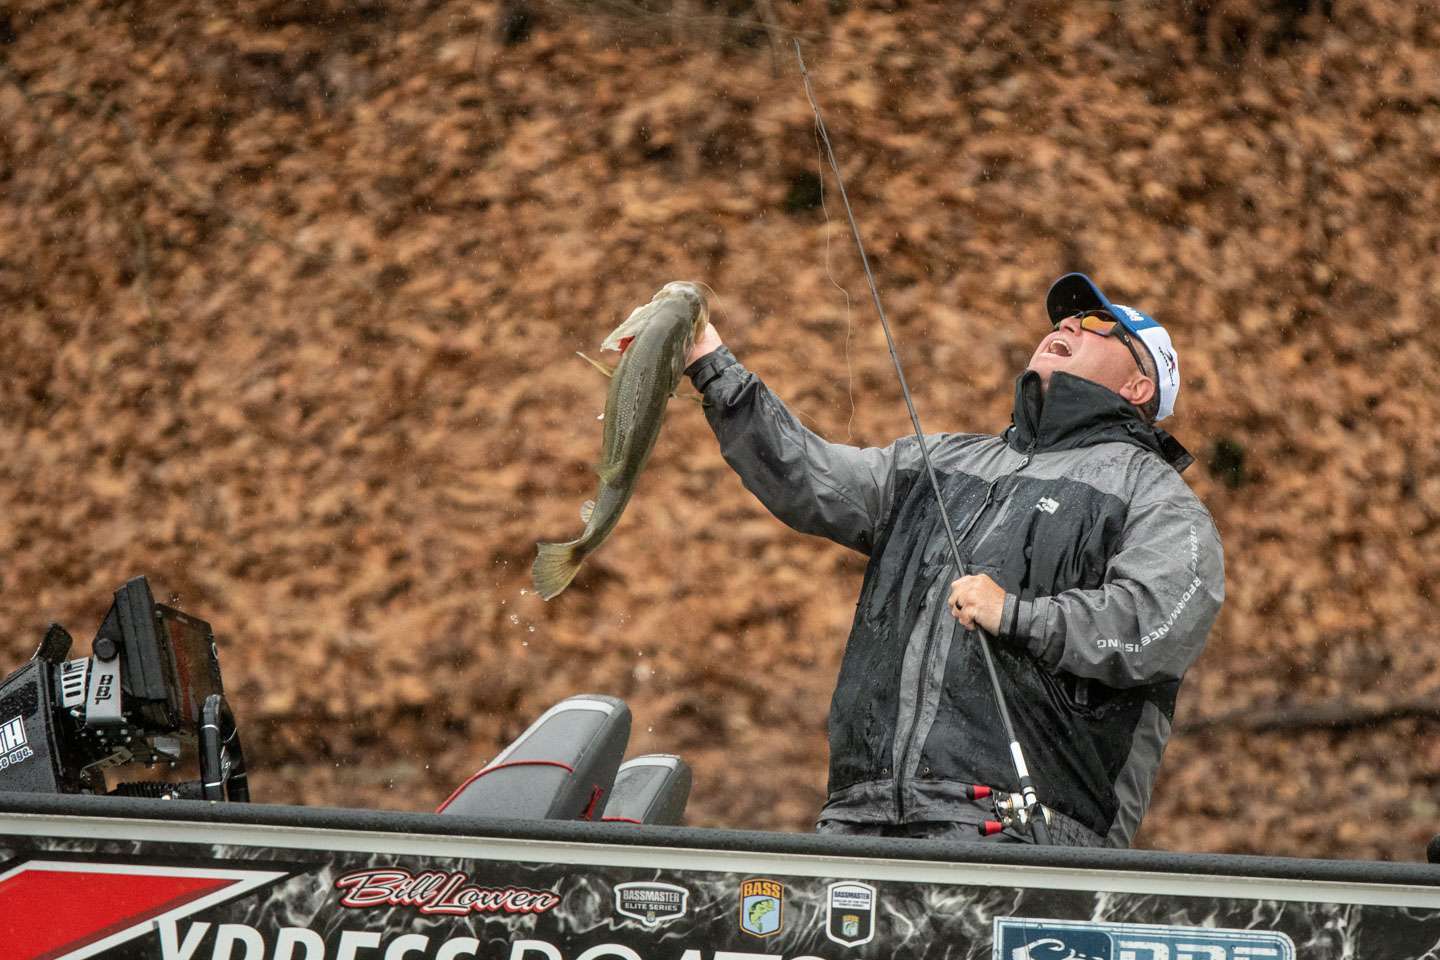 Bill Lowen, a veteran of 15 seasons on the Bassmaster Elite Series tour, opted to target largemouth in the main lake, where largemouth flourish, along with smallmouth. 
